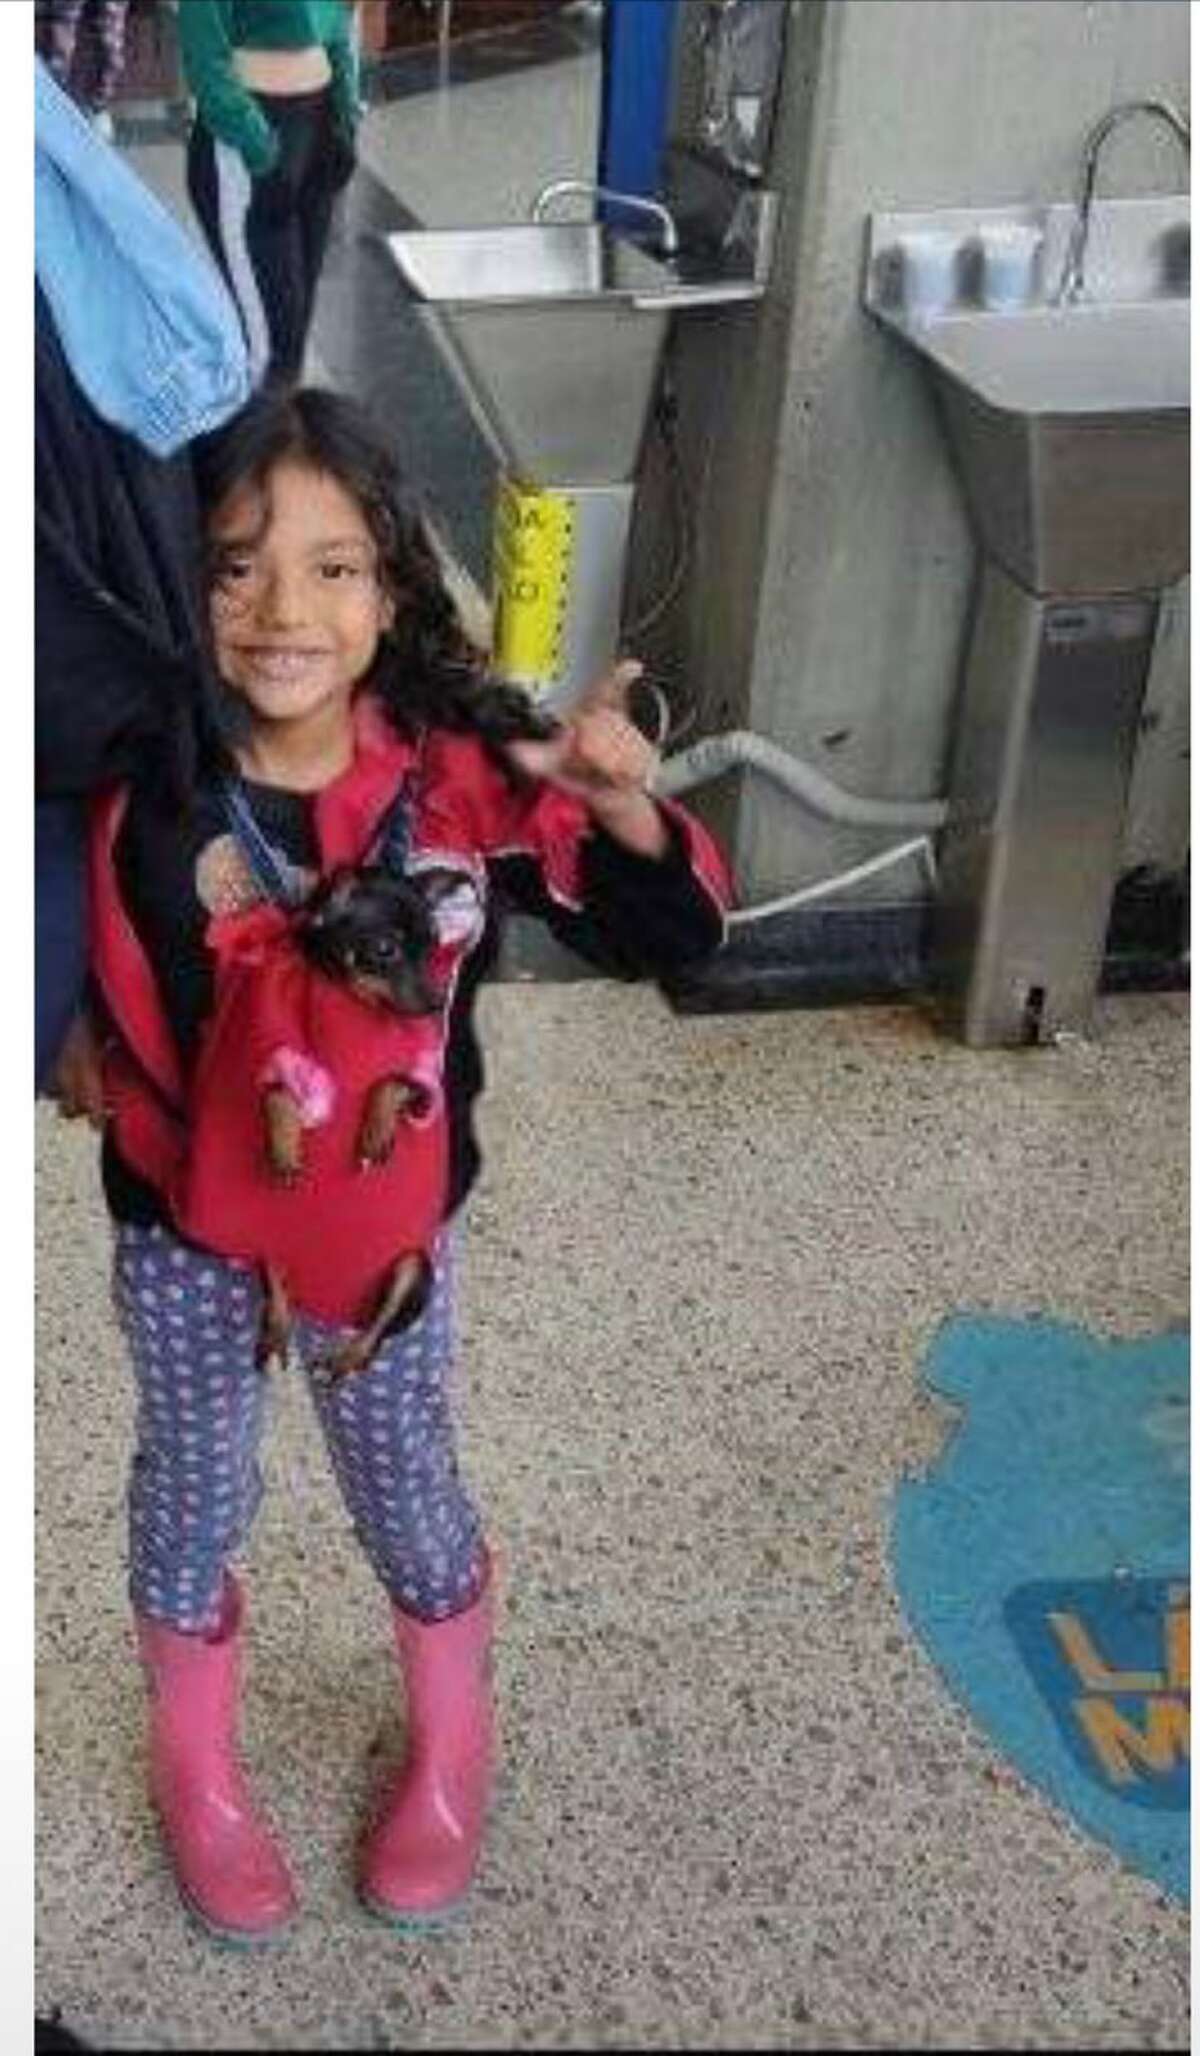 Pictured is the De Los Campos family's 5-year-old daughter with her dog, Fluke, before their trip from Venezuela to the United States. 